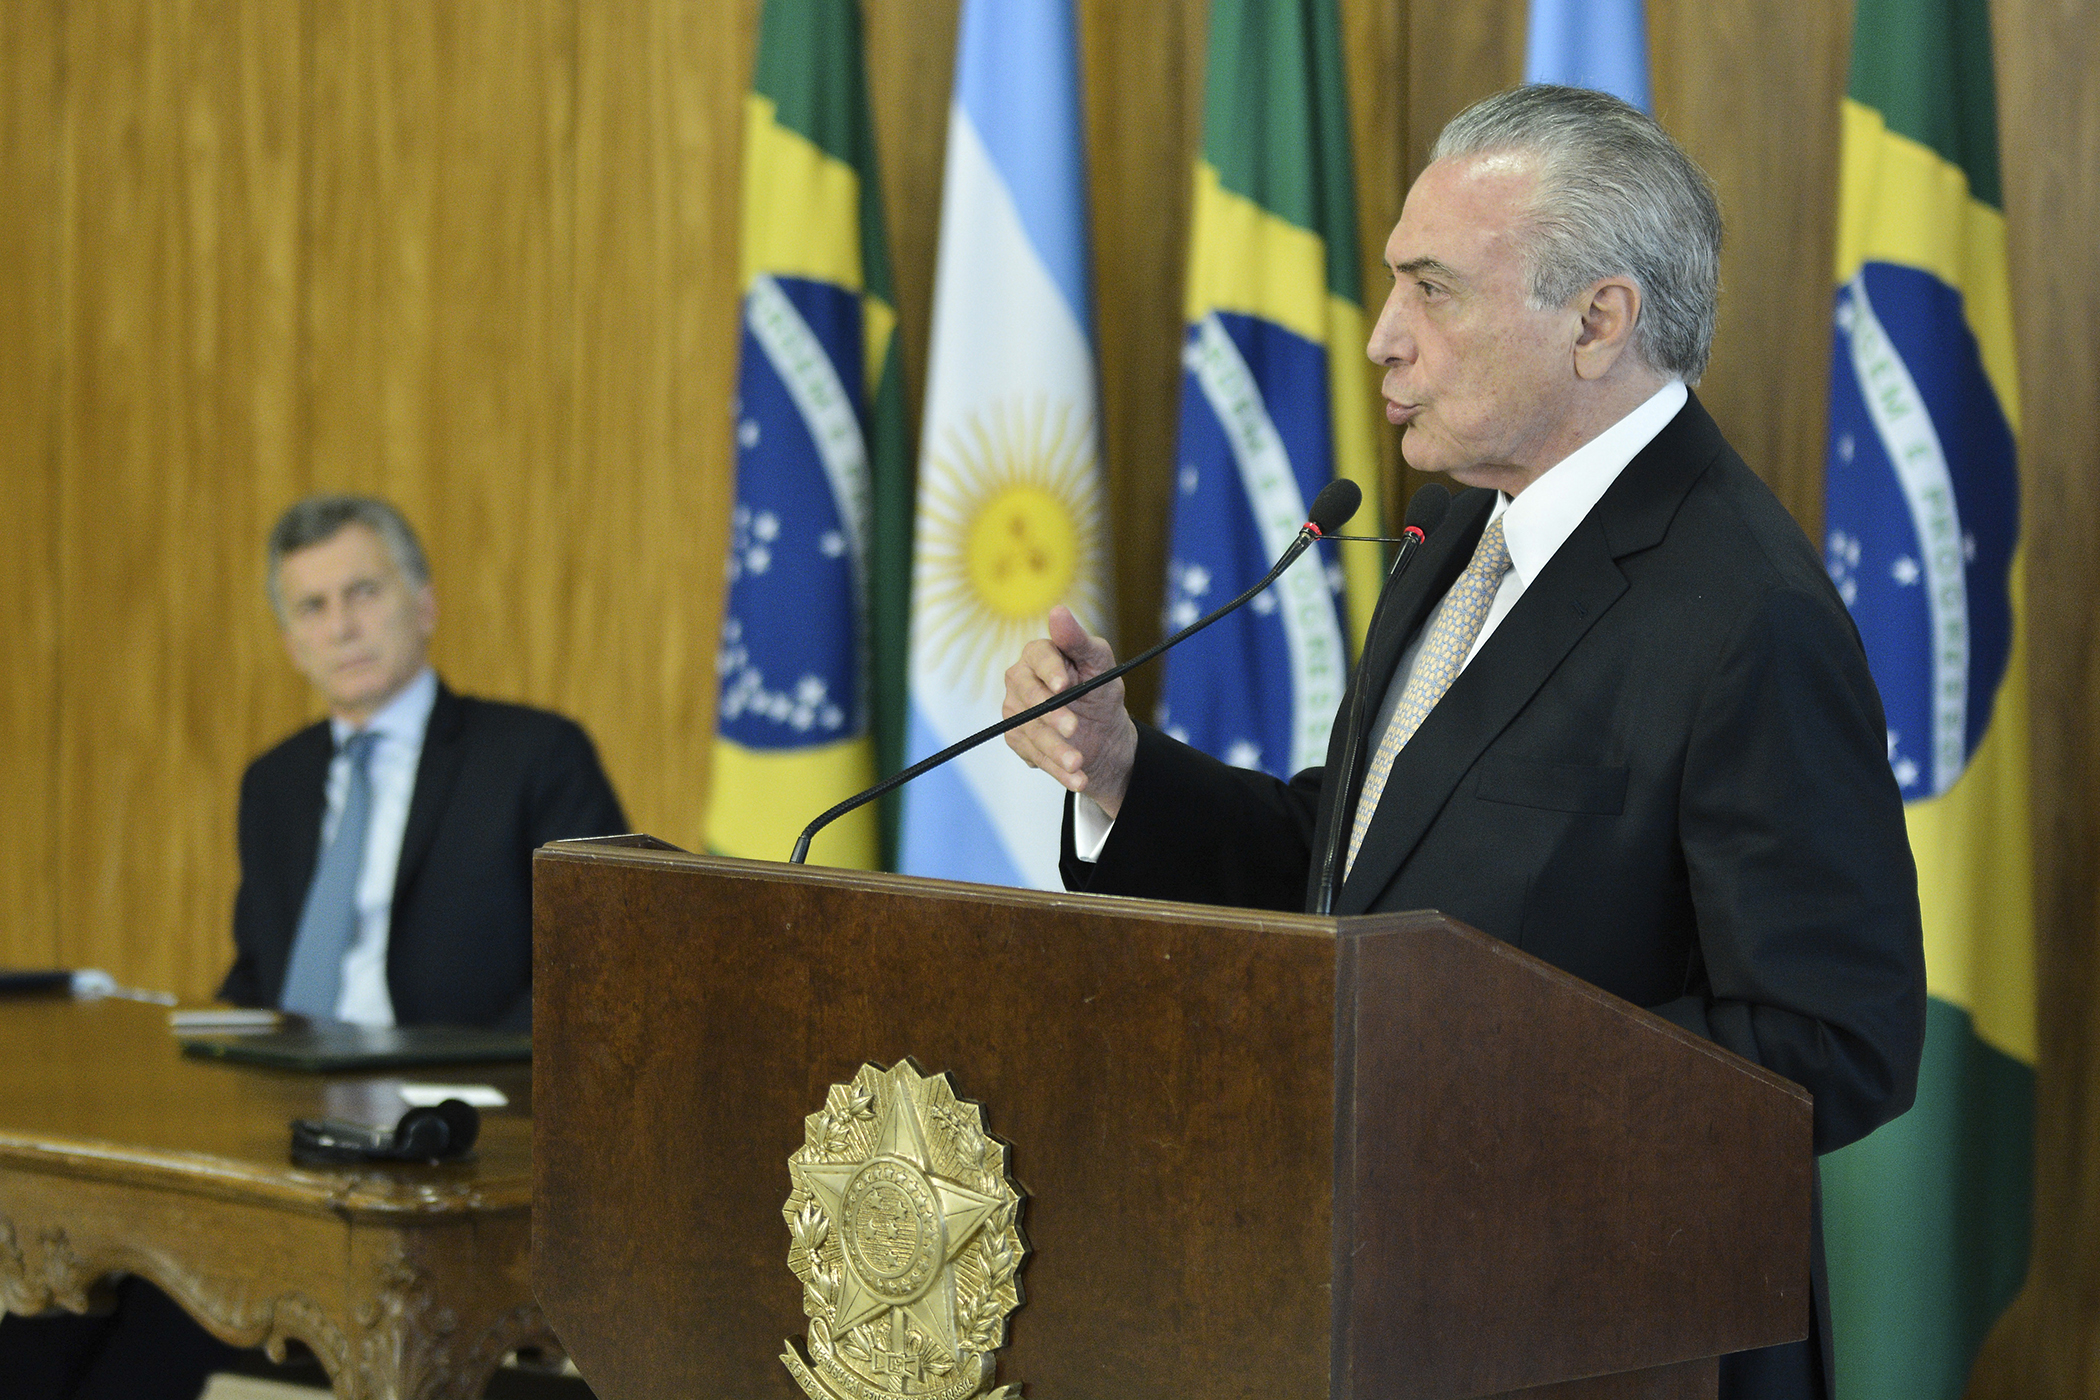 Michel Temer President of Brazil speaks during a press conference prior to signing Cooperation Agreements between Argentina and Brazil as part of an official visit to Planalto Palace on February 07, 2017 in Brasilia, Brazil. (Ricardo Botelho/Brazil Photo Pre&mdash;LatinContent/Getty Images)